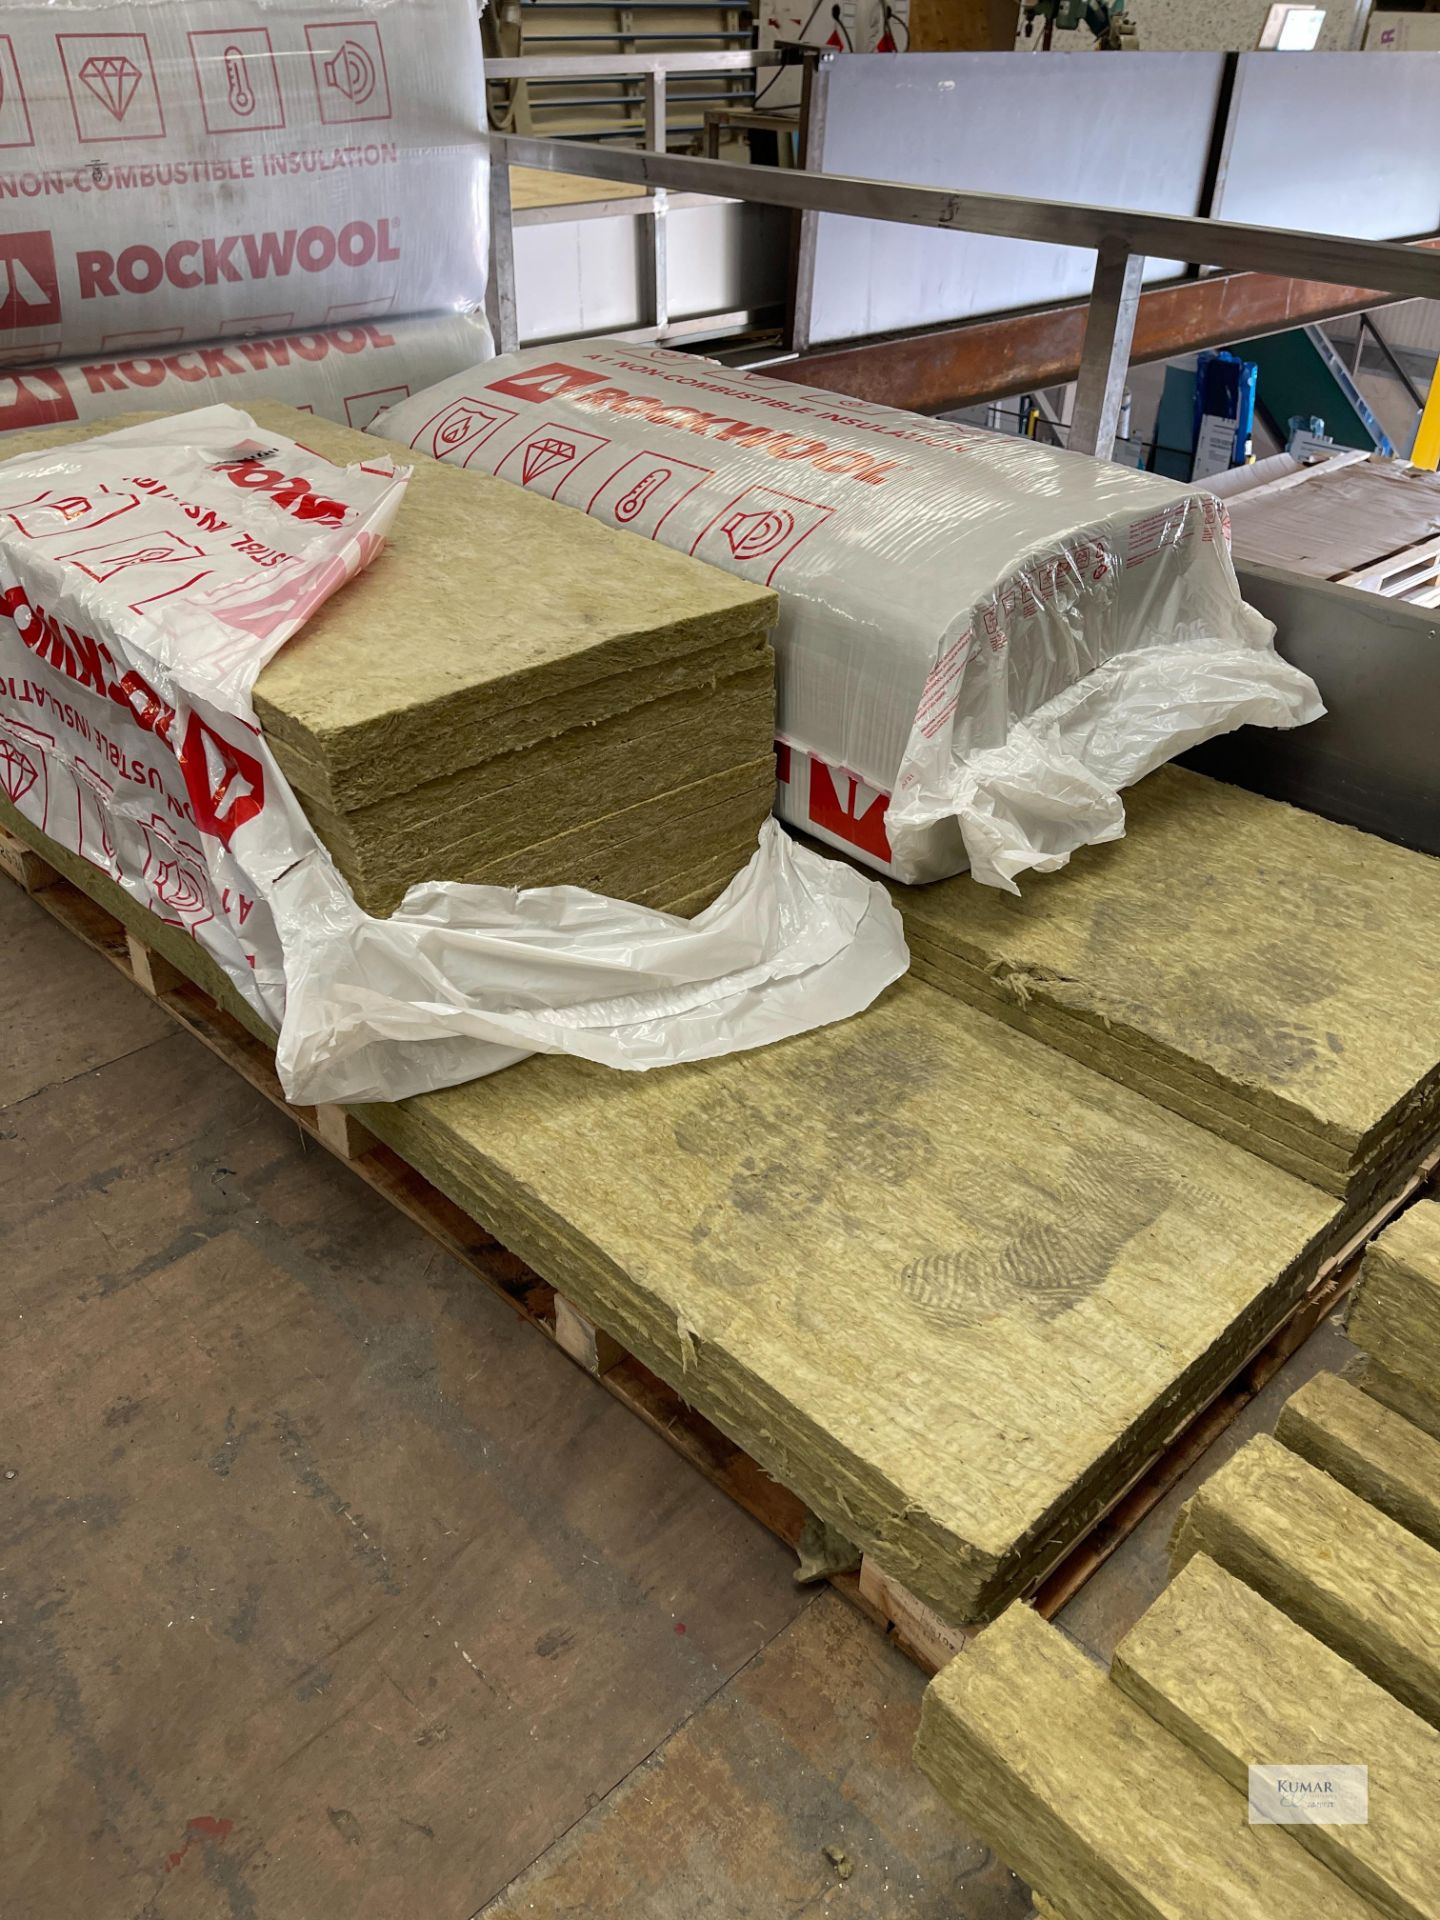 Quantity of RWA Rockwool A1 Non Combustible Insulation